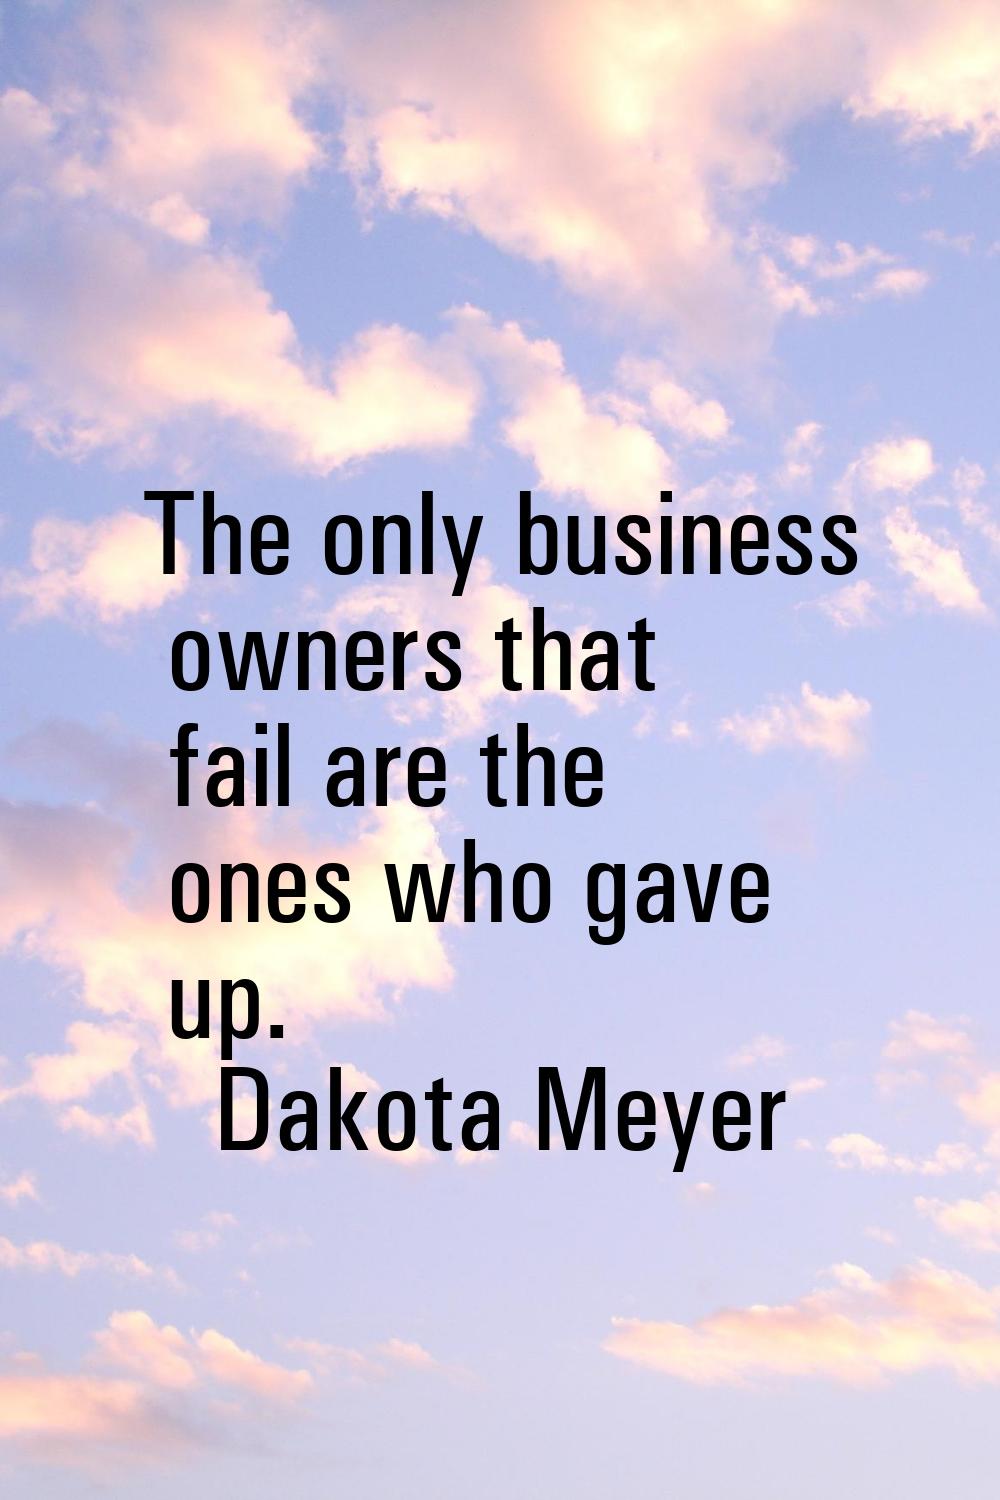 The only business owners that fail are the ones who gave up.